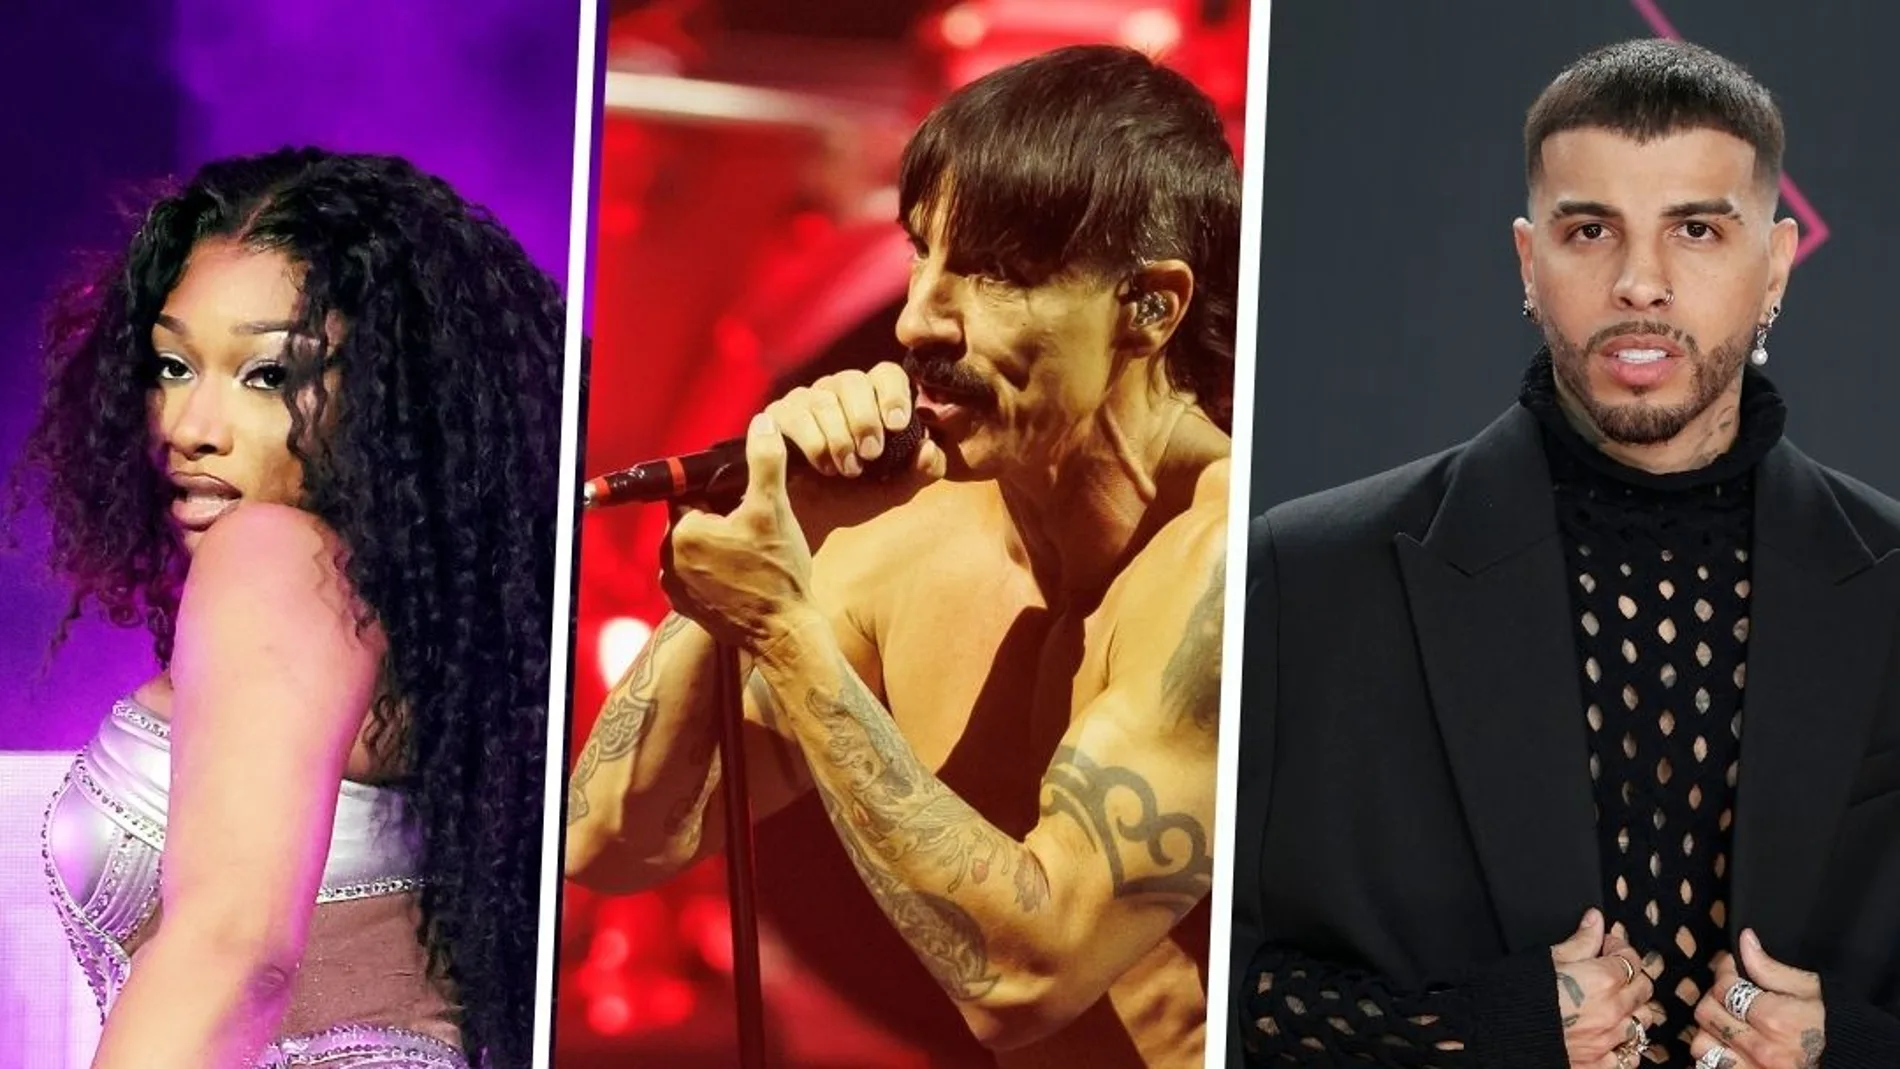 Red Hot Chili Peppers, Rauw Alejandro y Megan Thee Stallion actuarán en los Billboard Music Awards